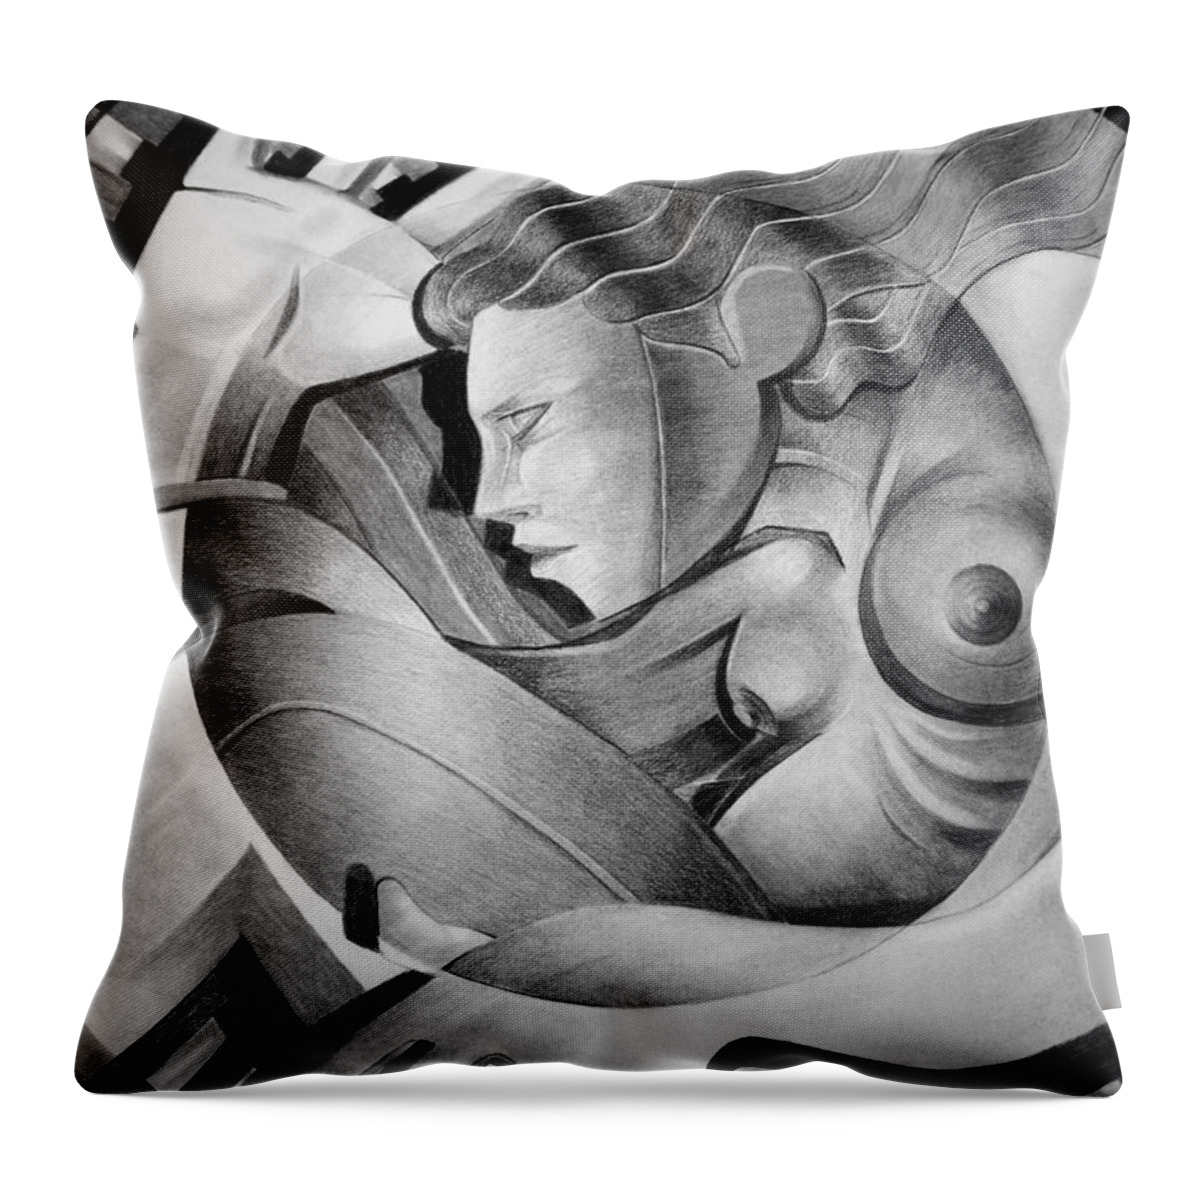 Art Throw Pillow featuring the drawing In Circle by Myron Belfast